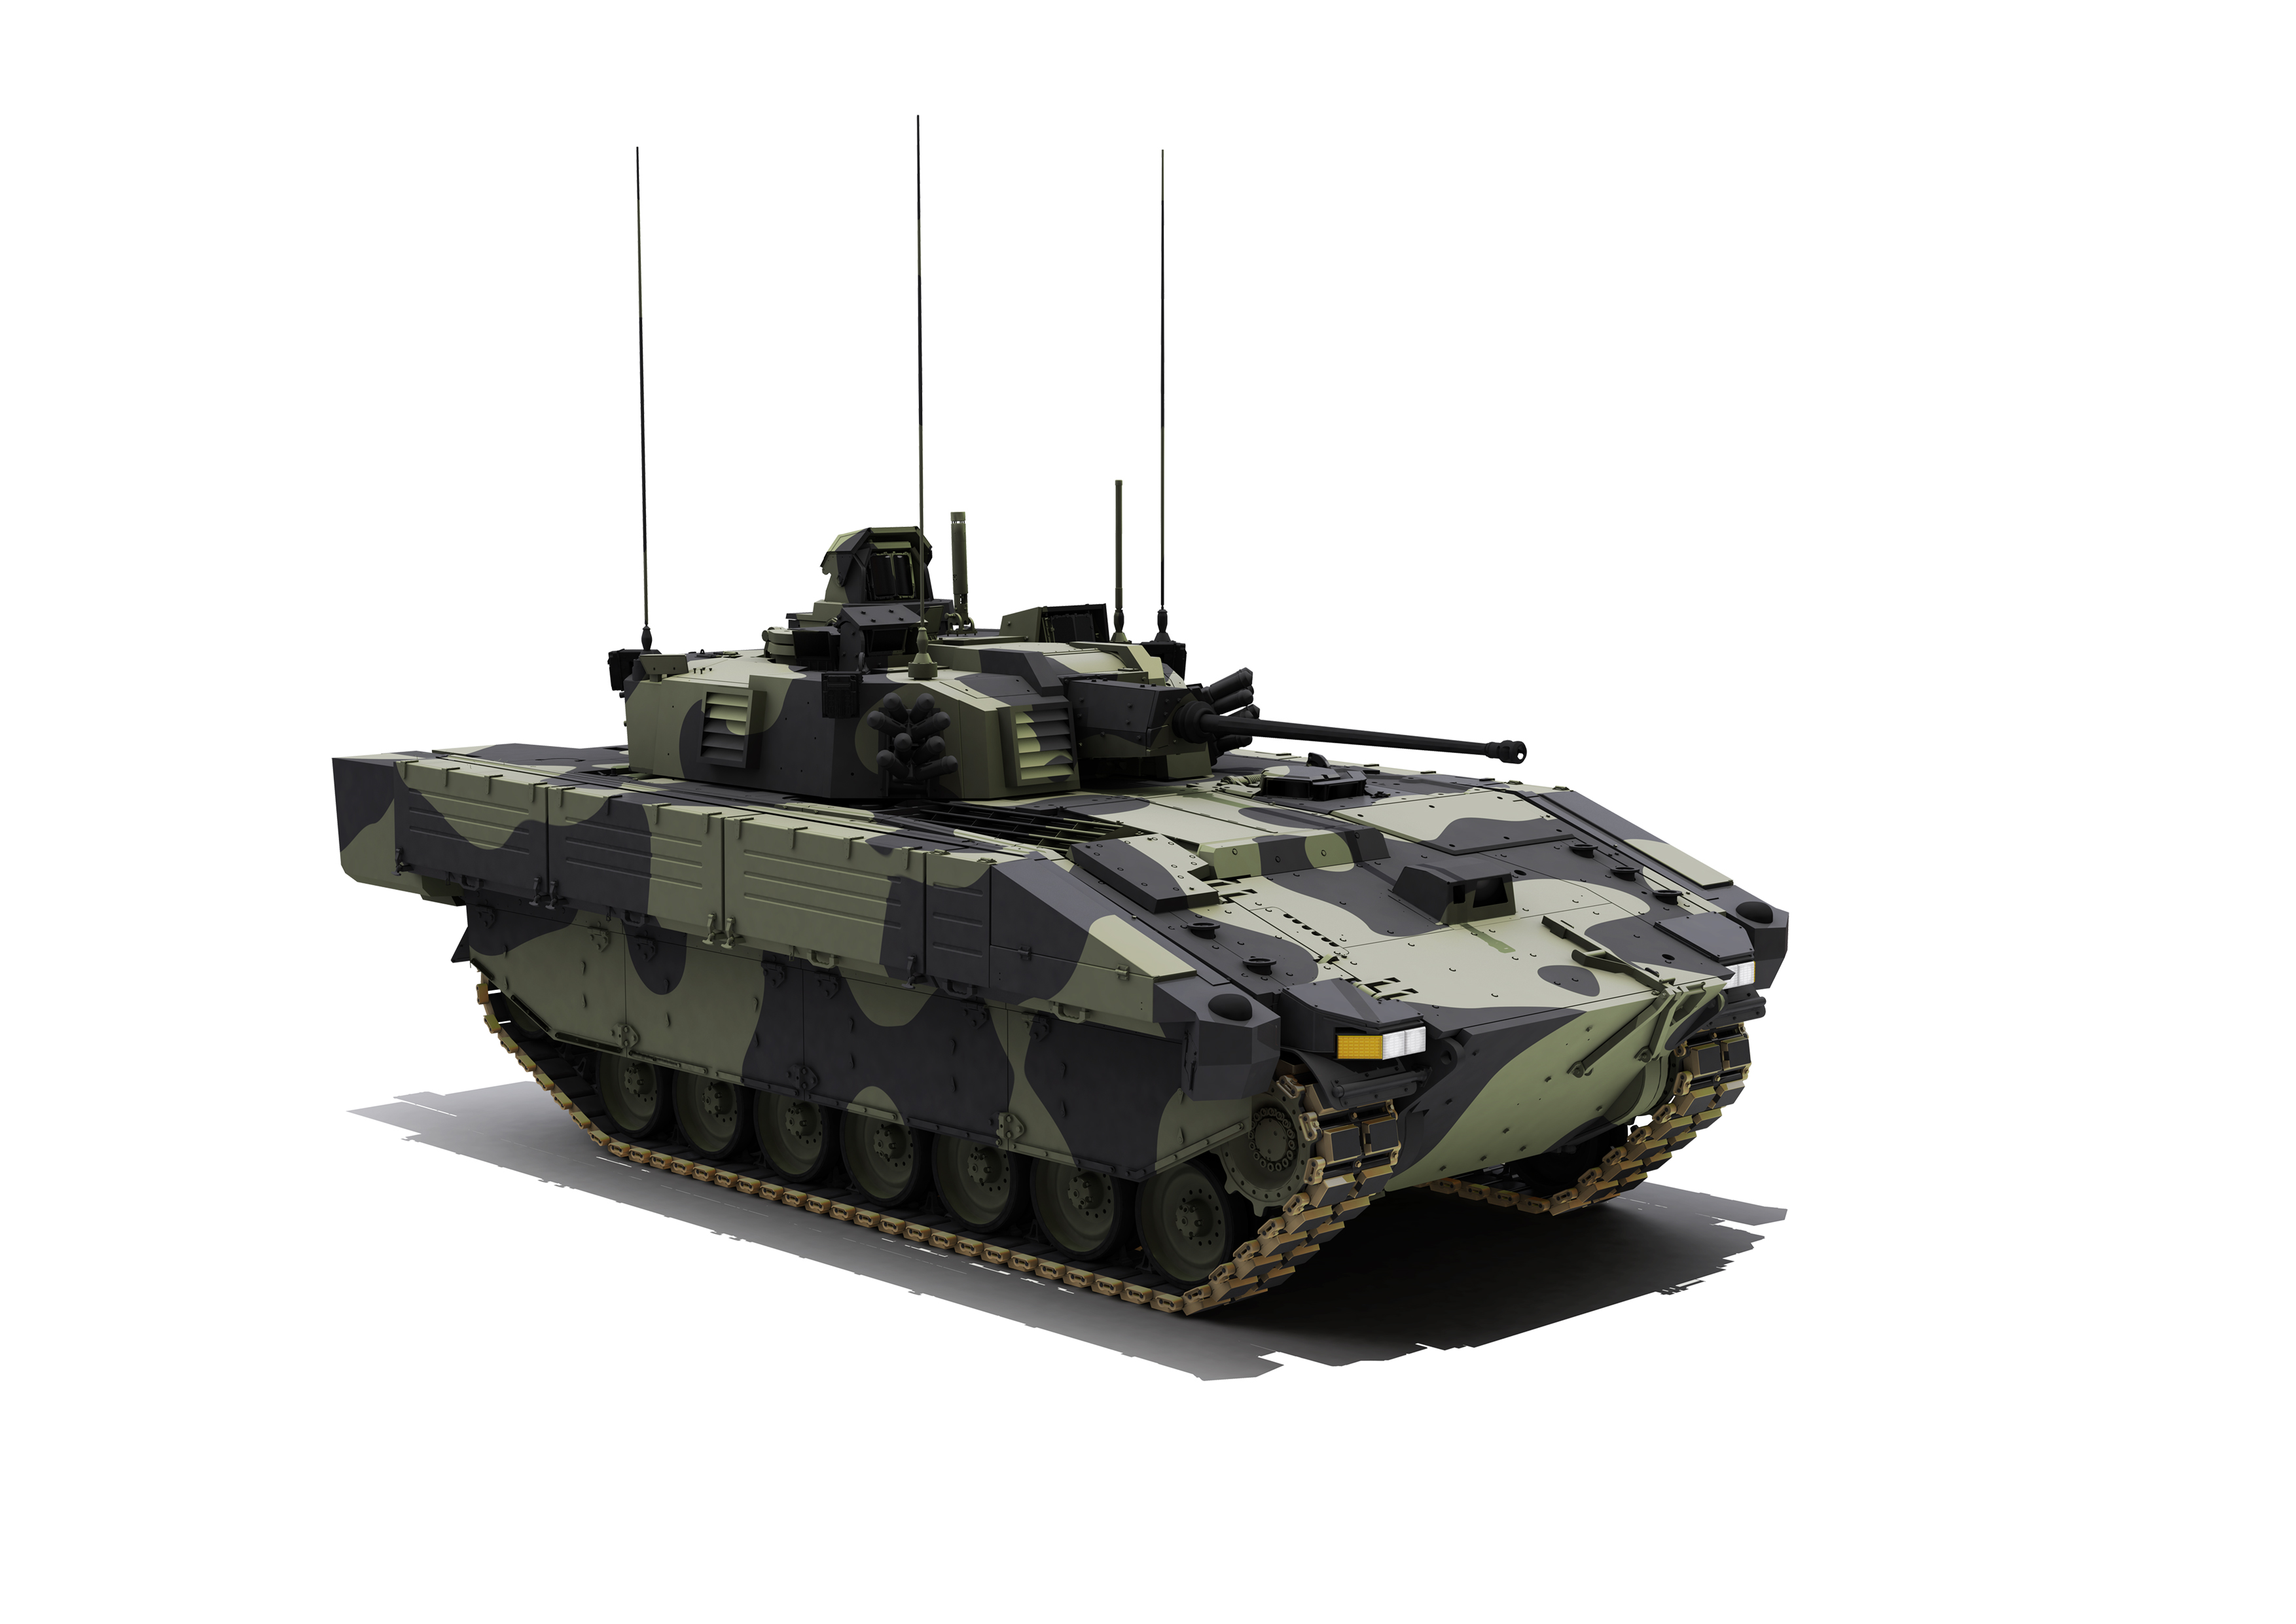 GE has won an order valued at ~$100m to equip the the British Army’s SCOUT Specialist Vehicle (SV) platforms